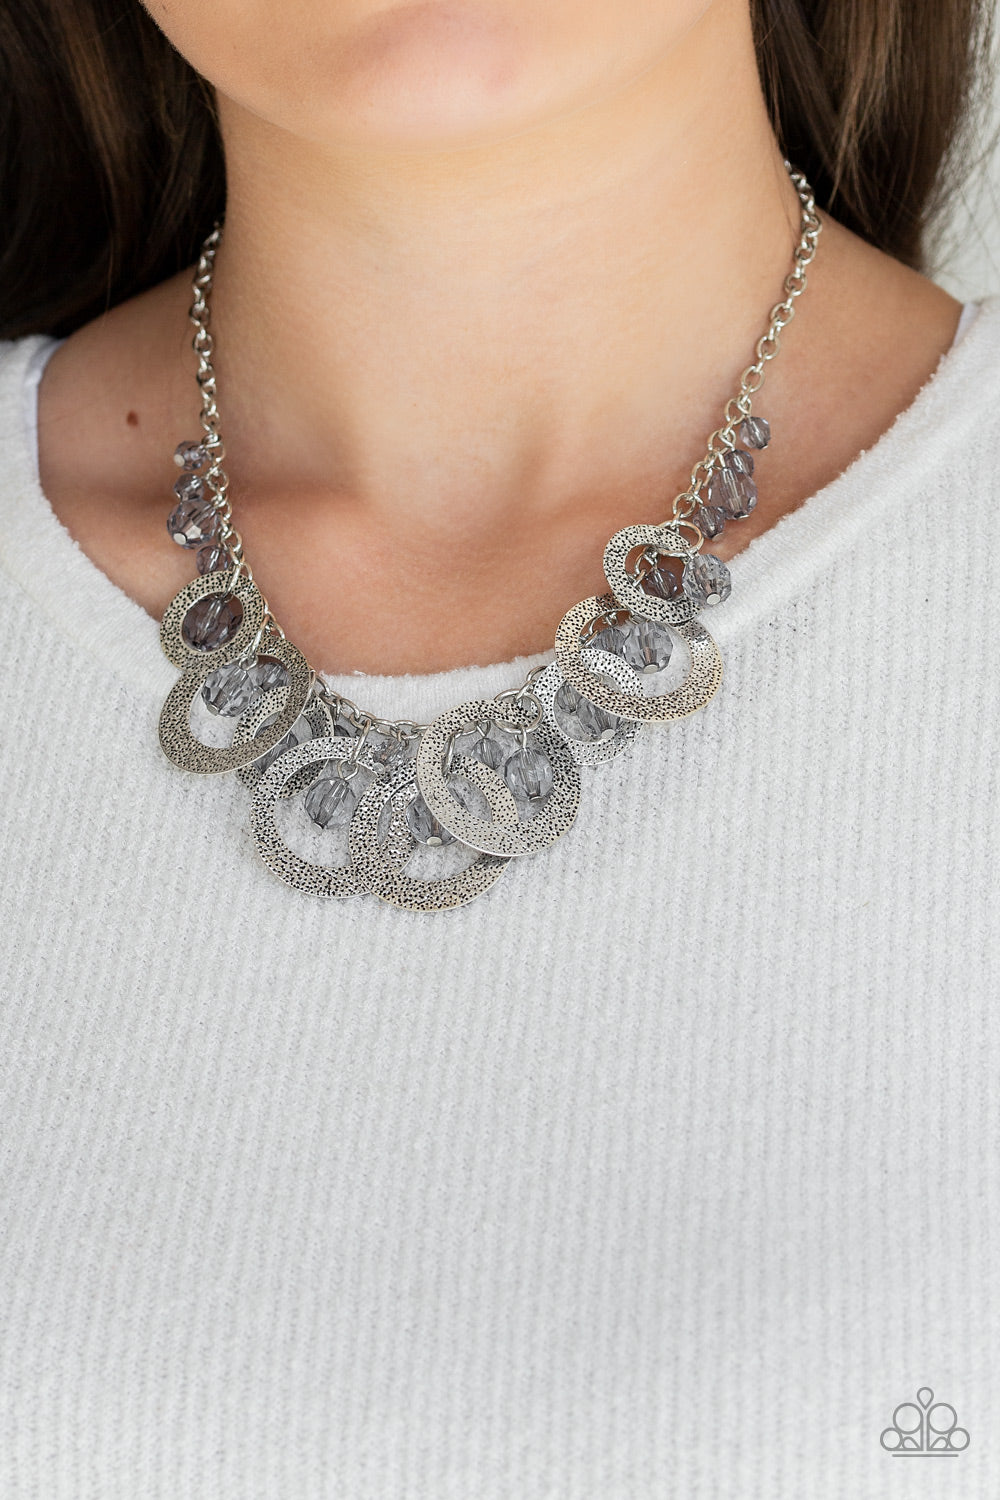 Turn It Up - Silver - Necklace - Paparazzi Accessories